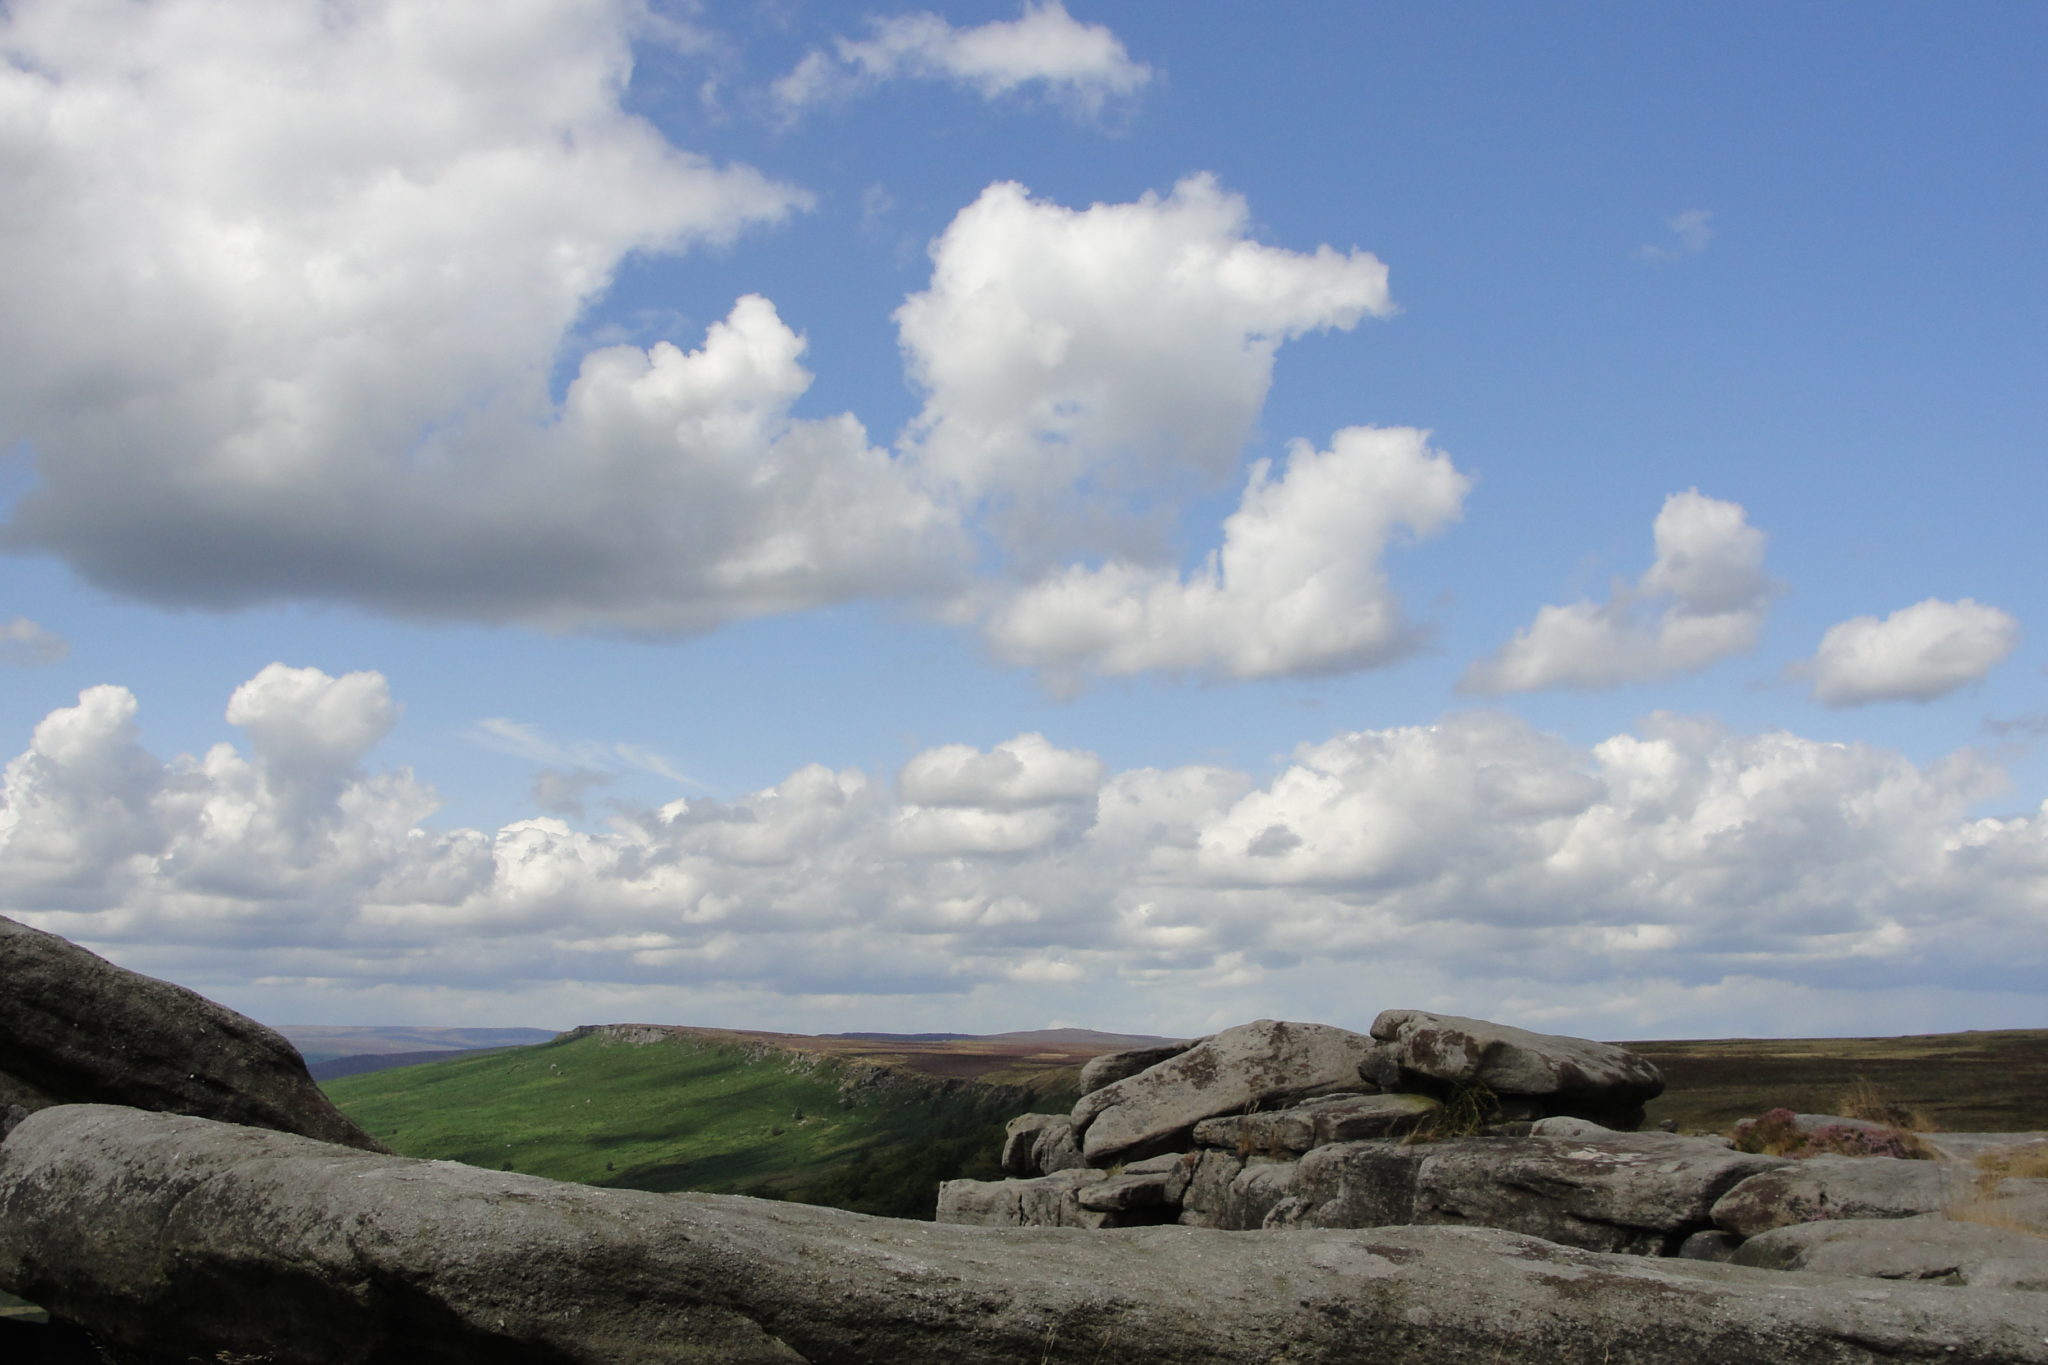 Stanage Edge in the Peak District National Park